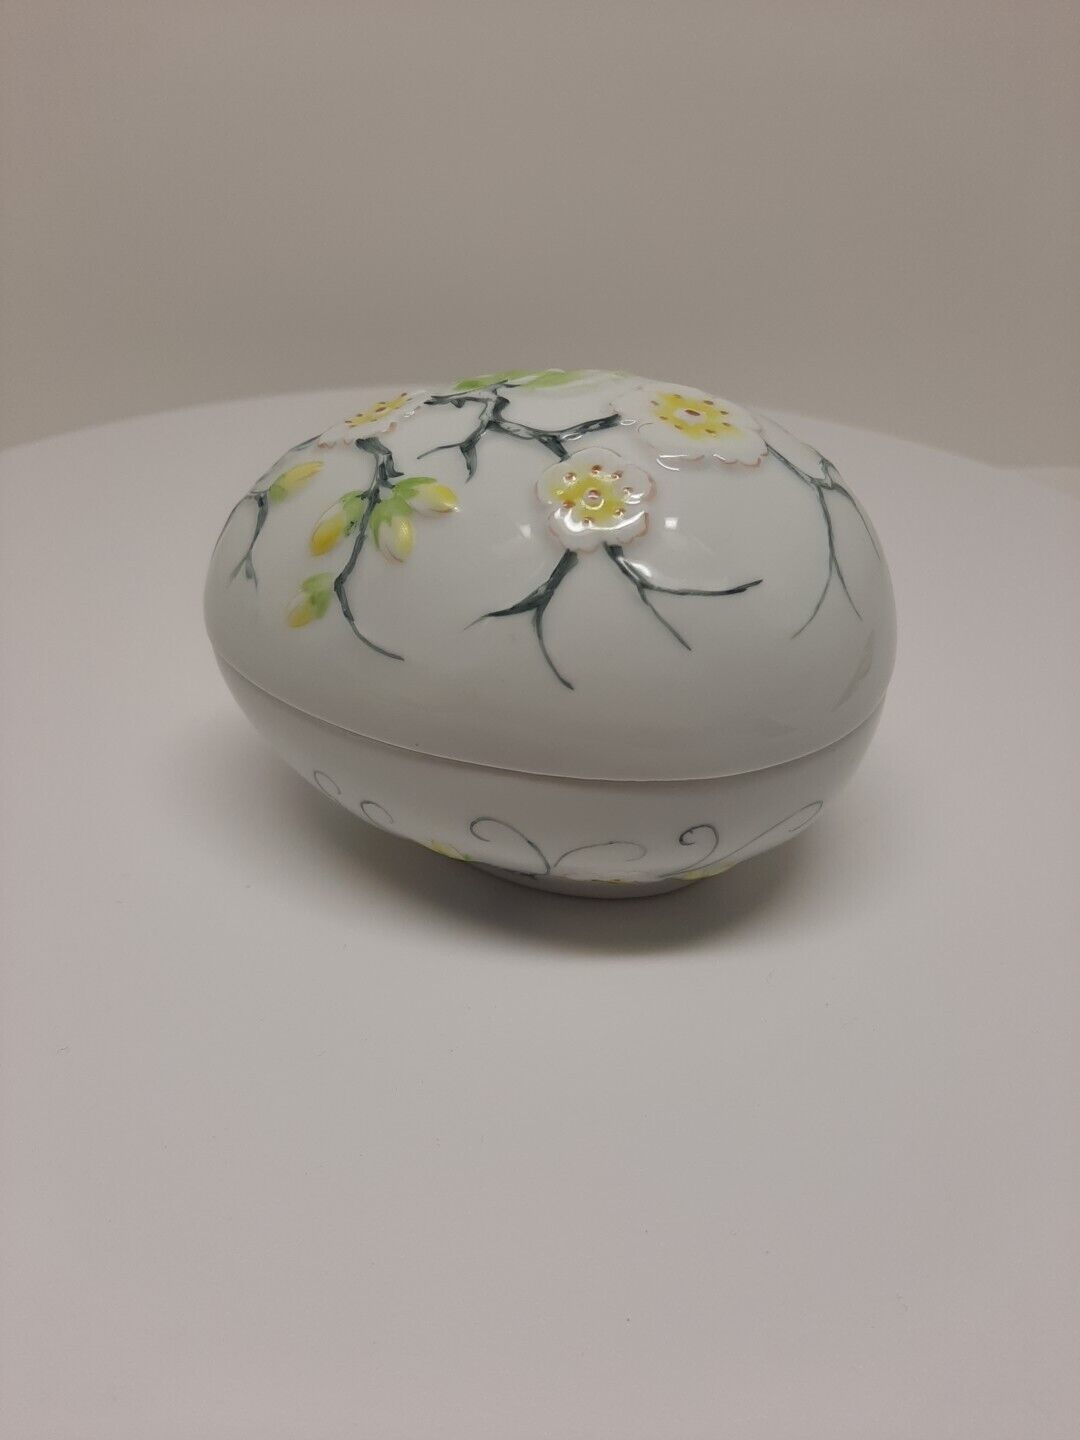 VTG Chamart Limoges France Hand Painted Yellow Floral Jewelry Trinket Box Egg 